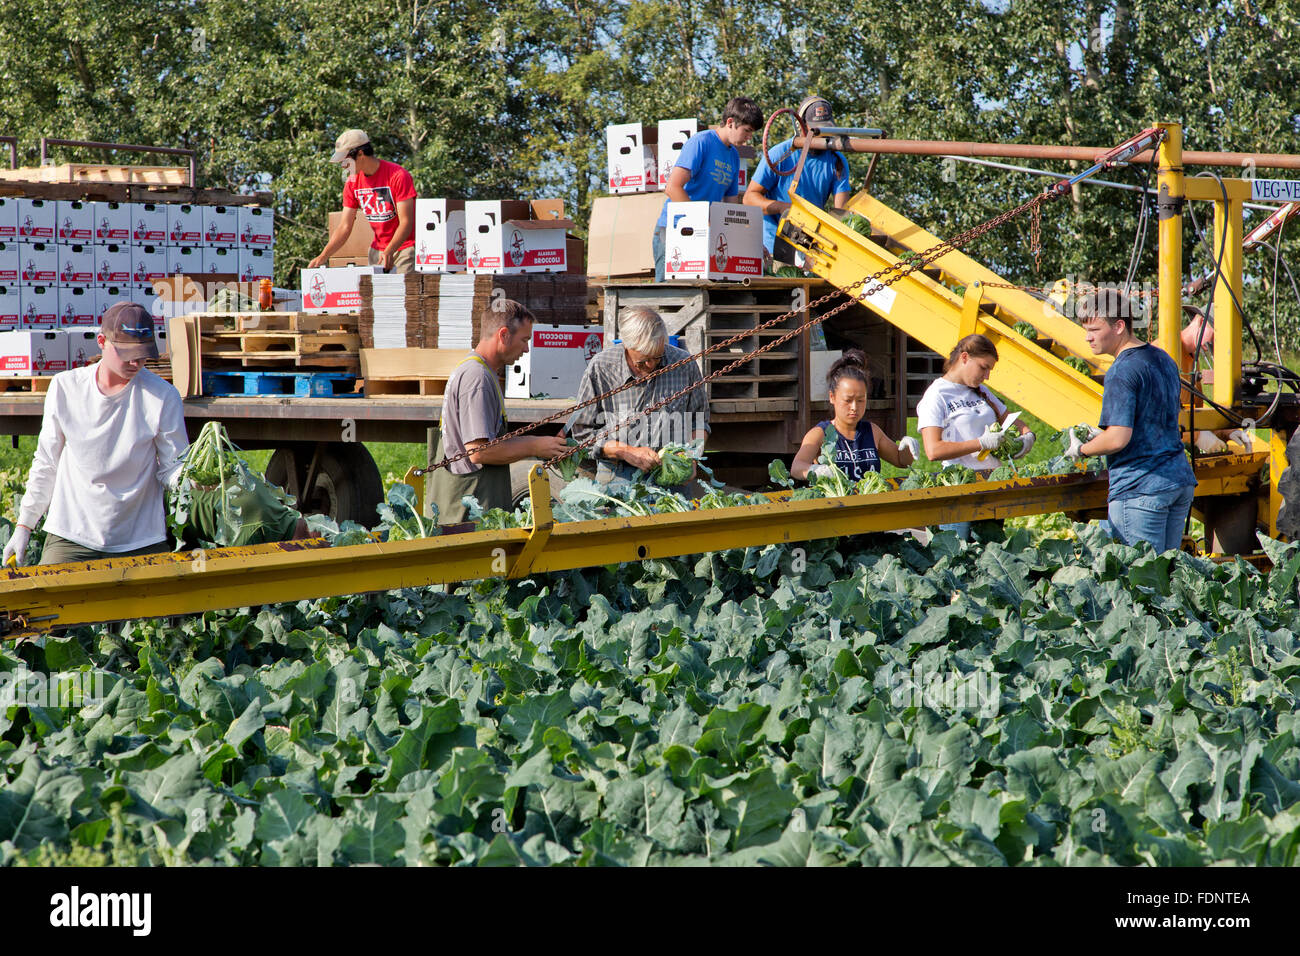 Farmer with family, crew harvesting broccoli crowns, packing & stacking boxes. Stock Photo